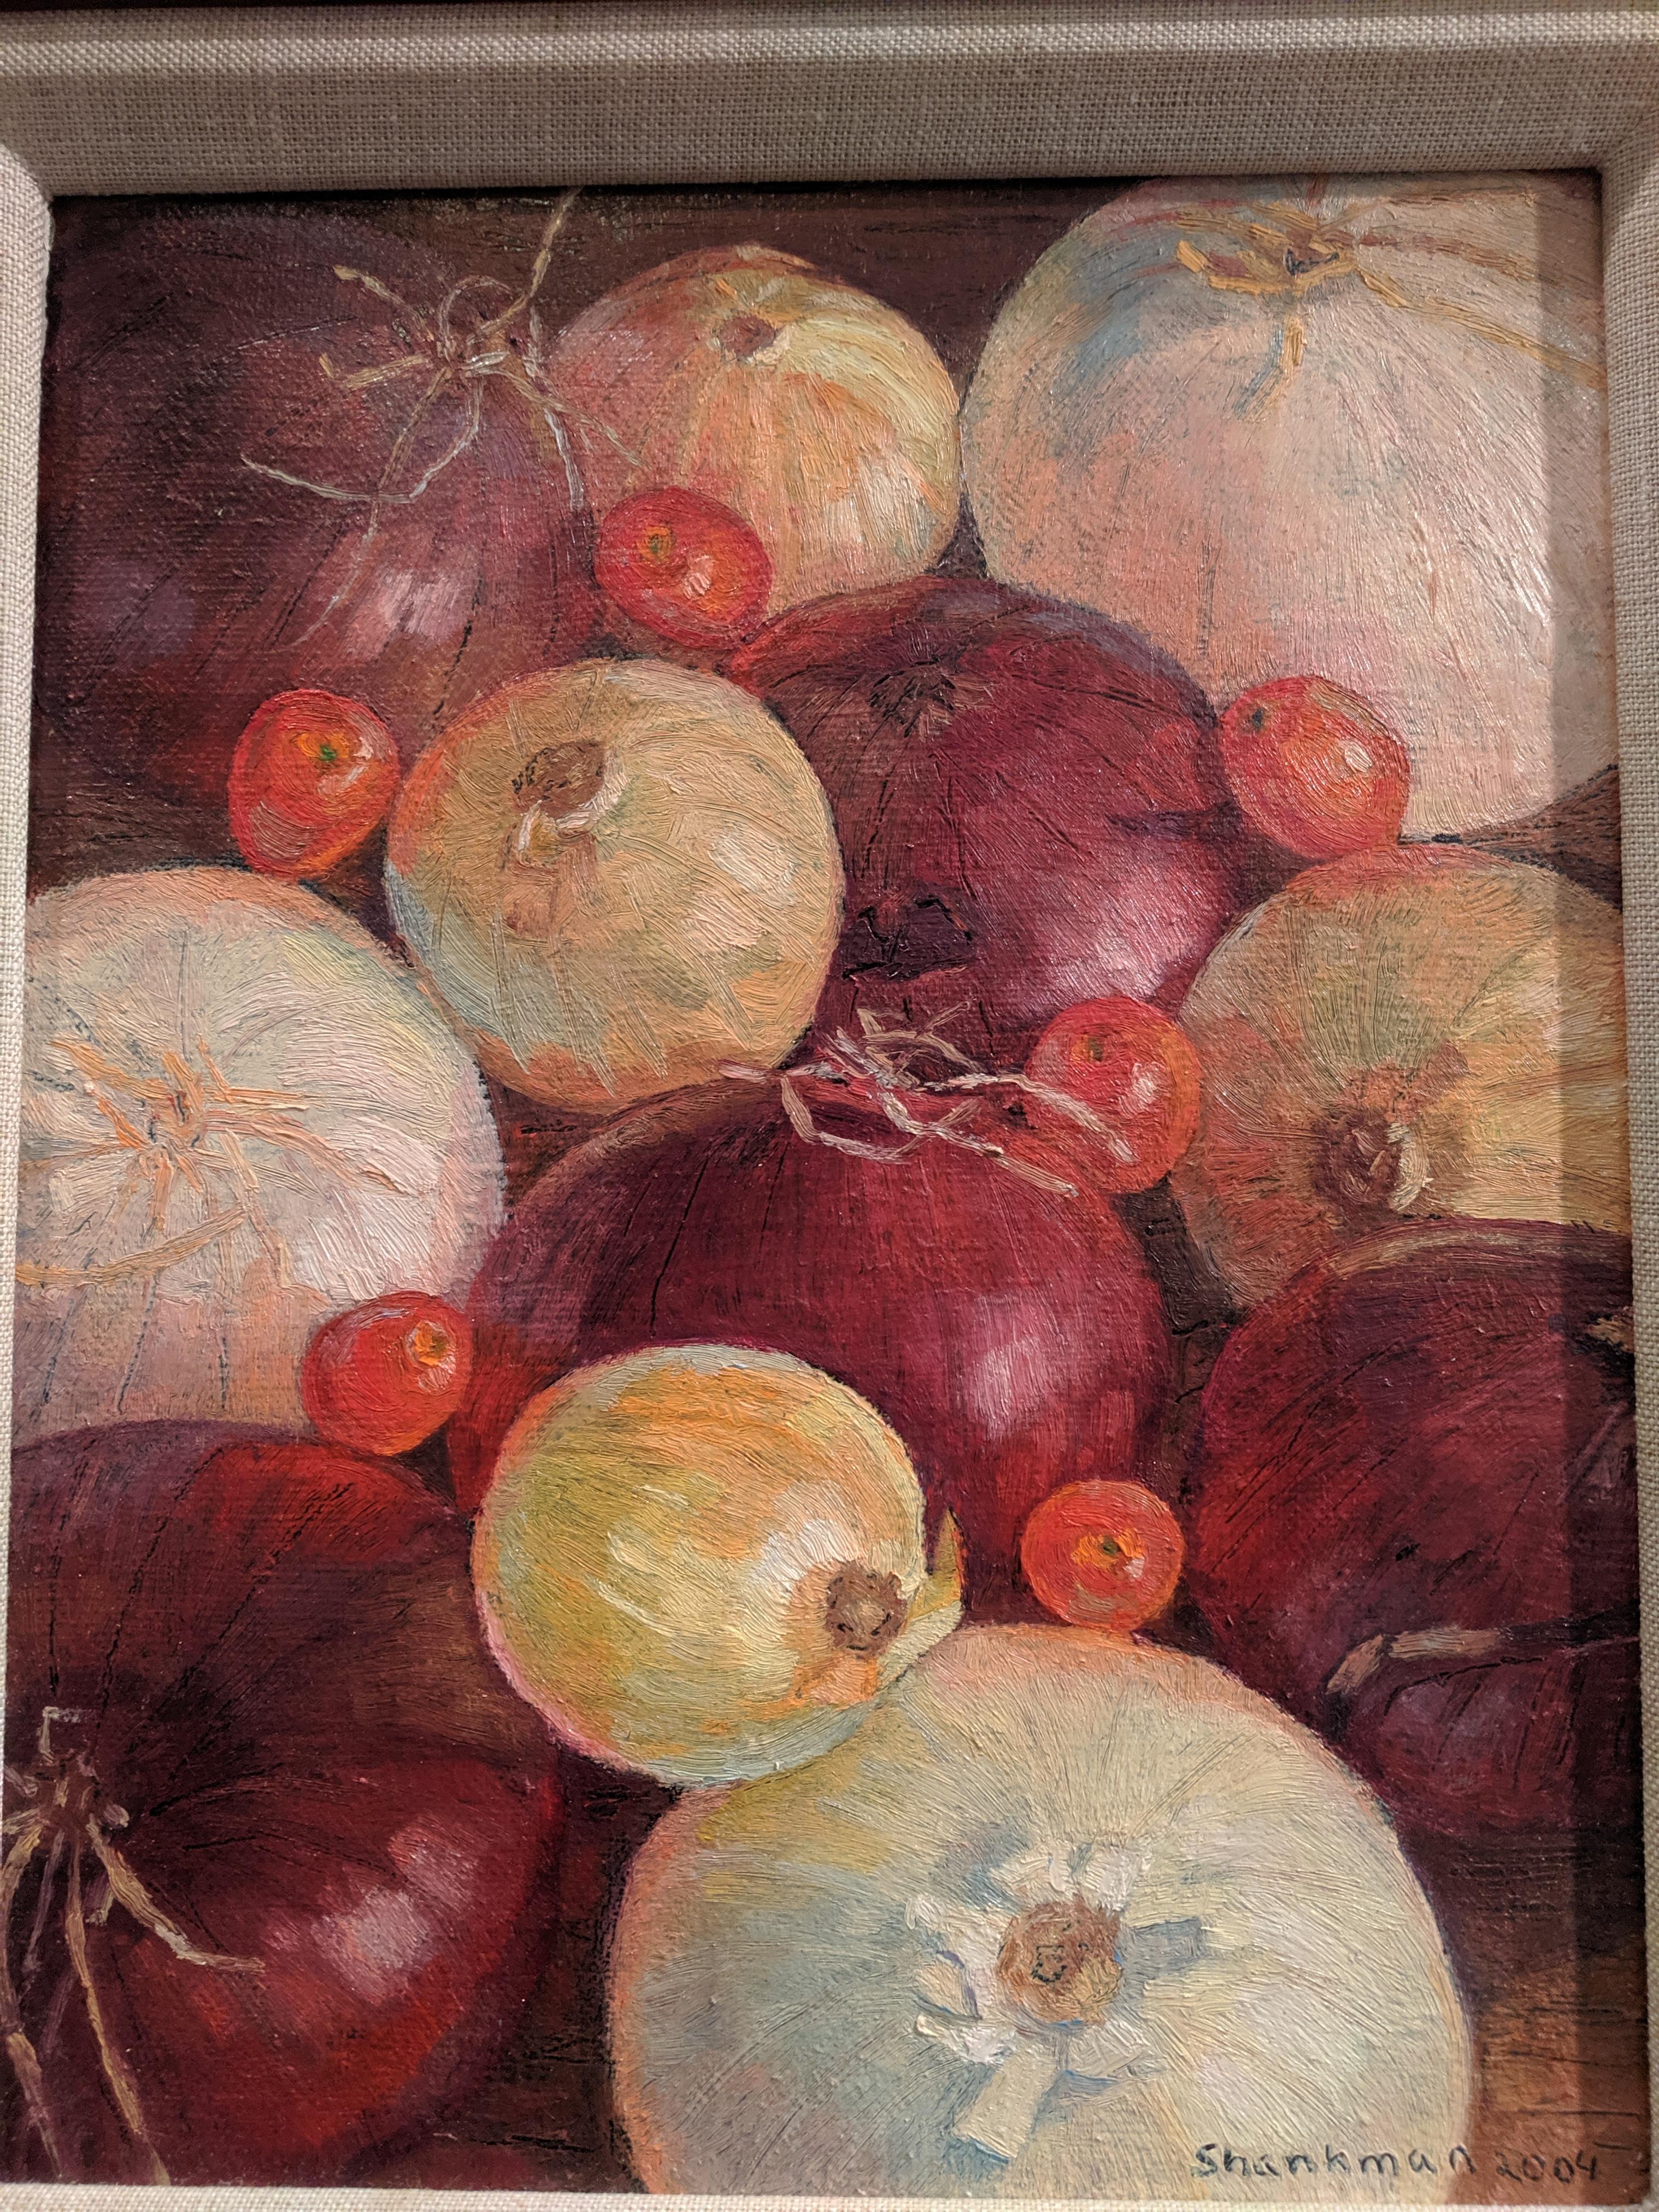 Onions - Painting by Gary Shankman